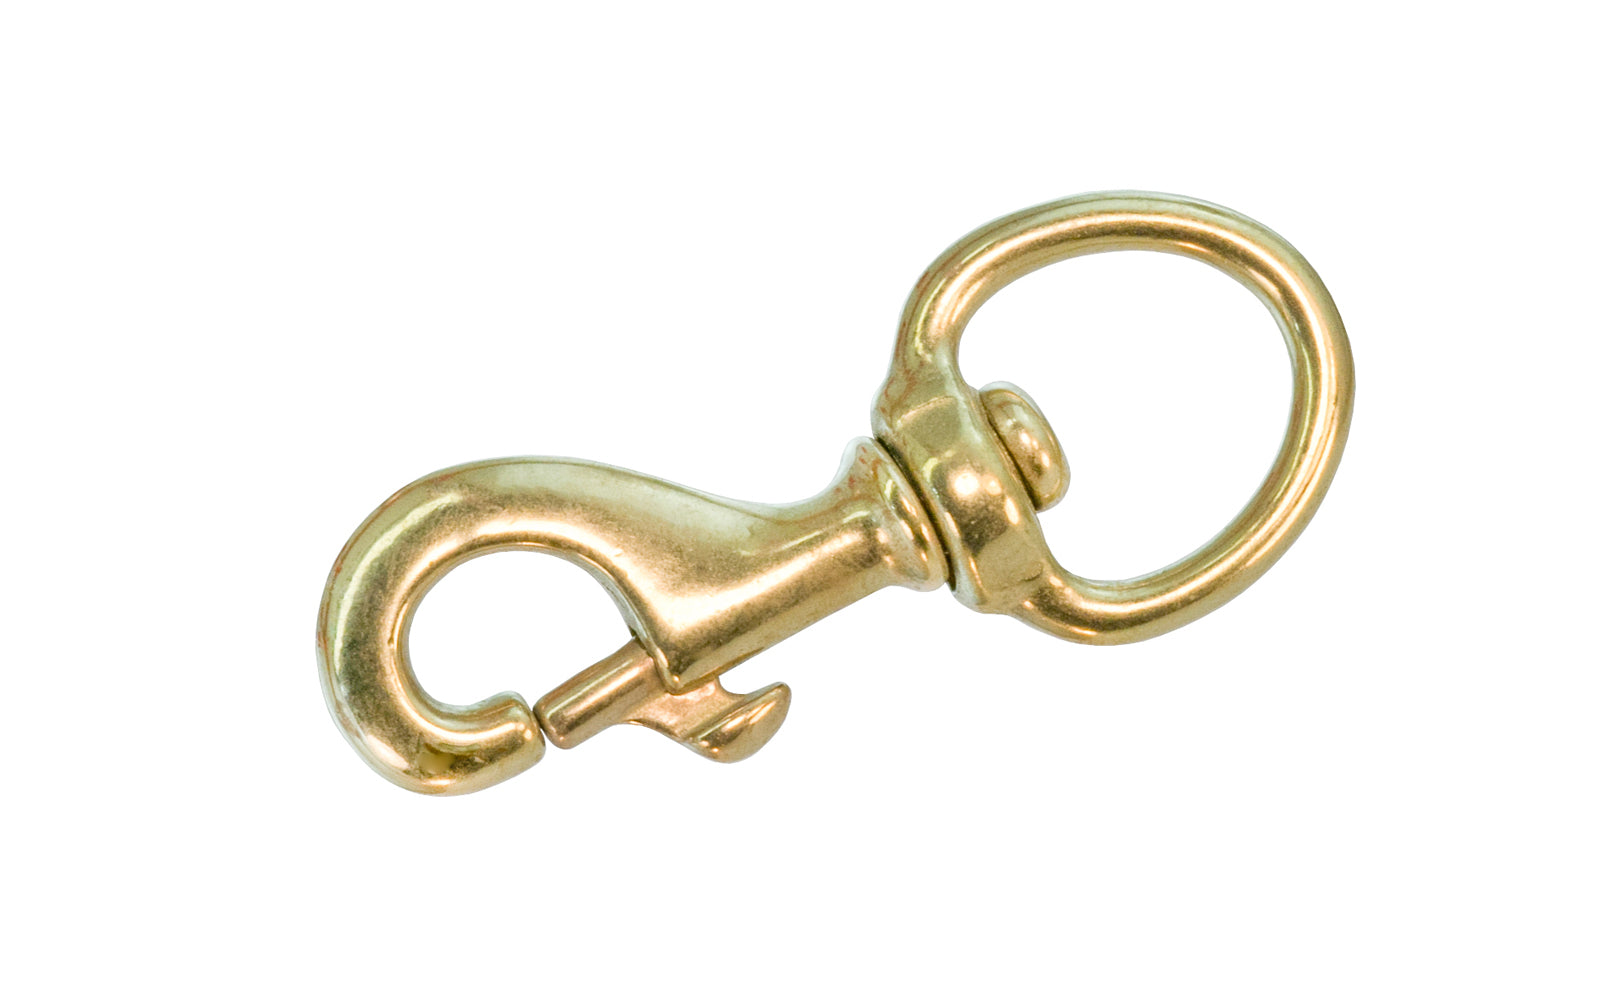 Solid Brass 1" Swivel Eye Bolt Snap. Made of solid brass material. 1" eye size opening inside diameter. 7/16" opening capacity.